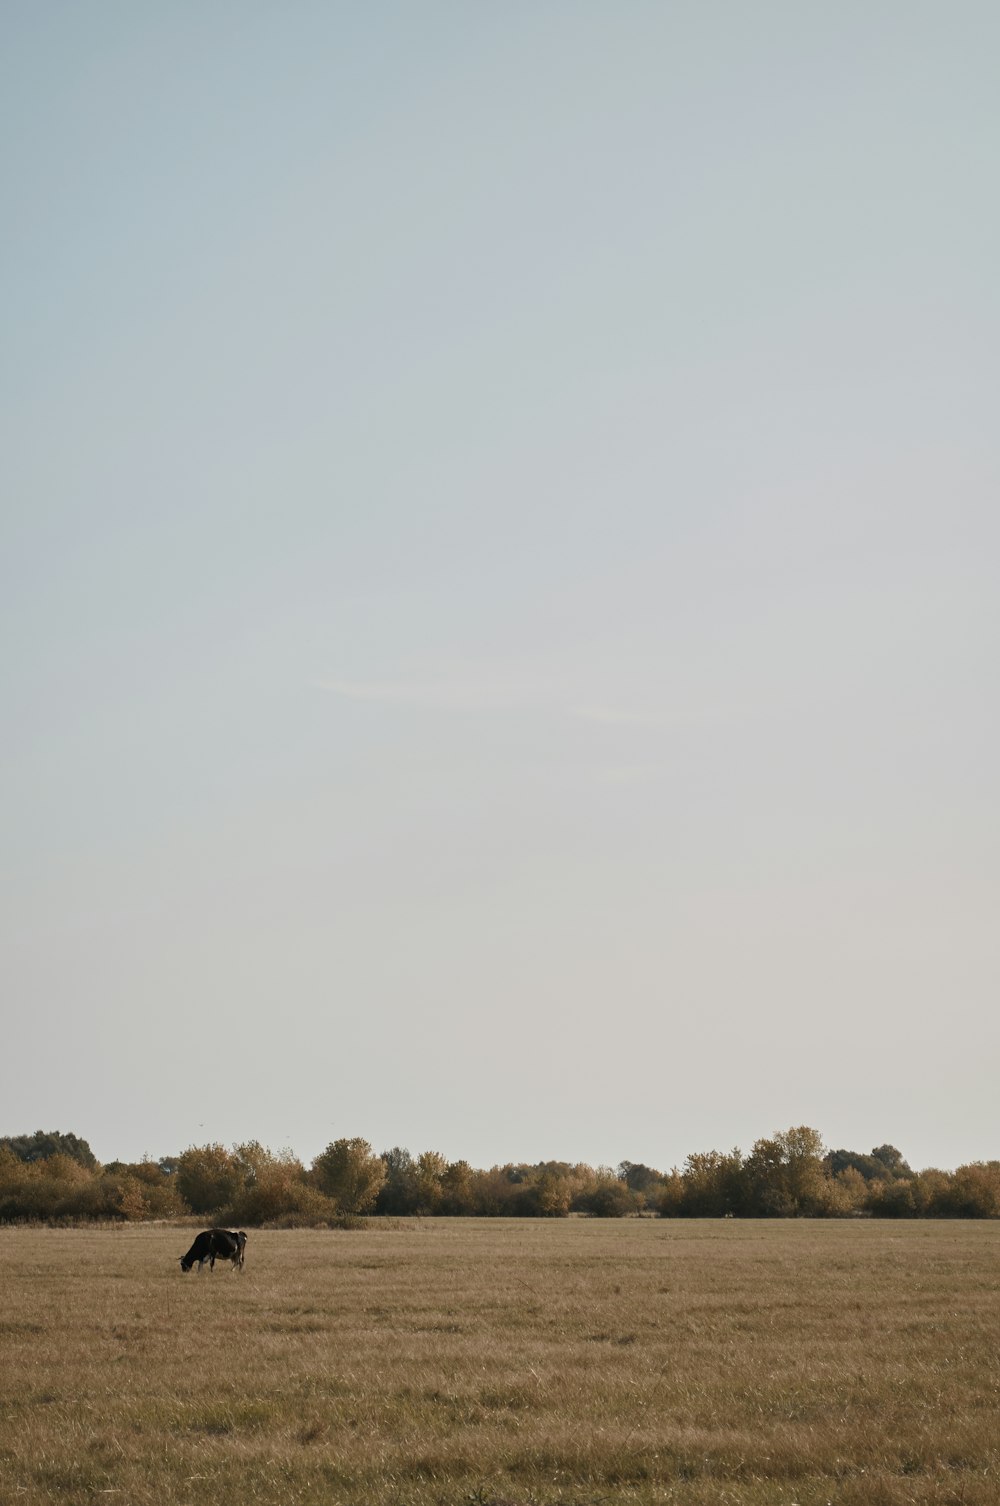 a large black cow standing on top of a dry grass field